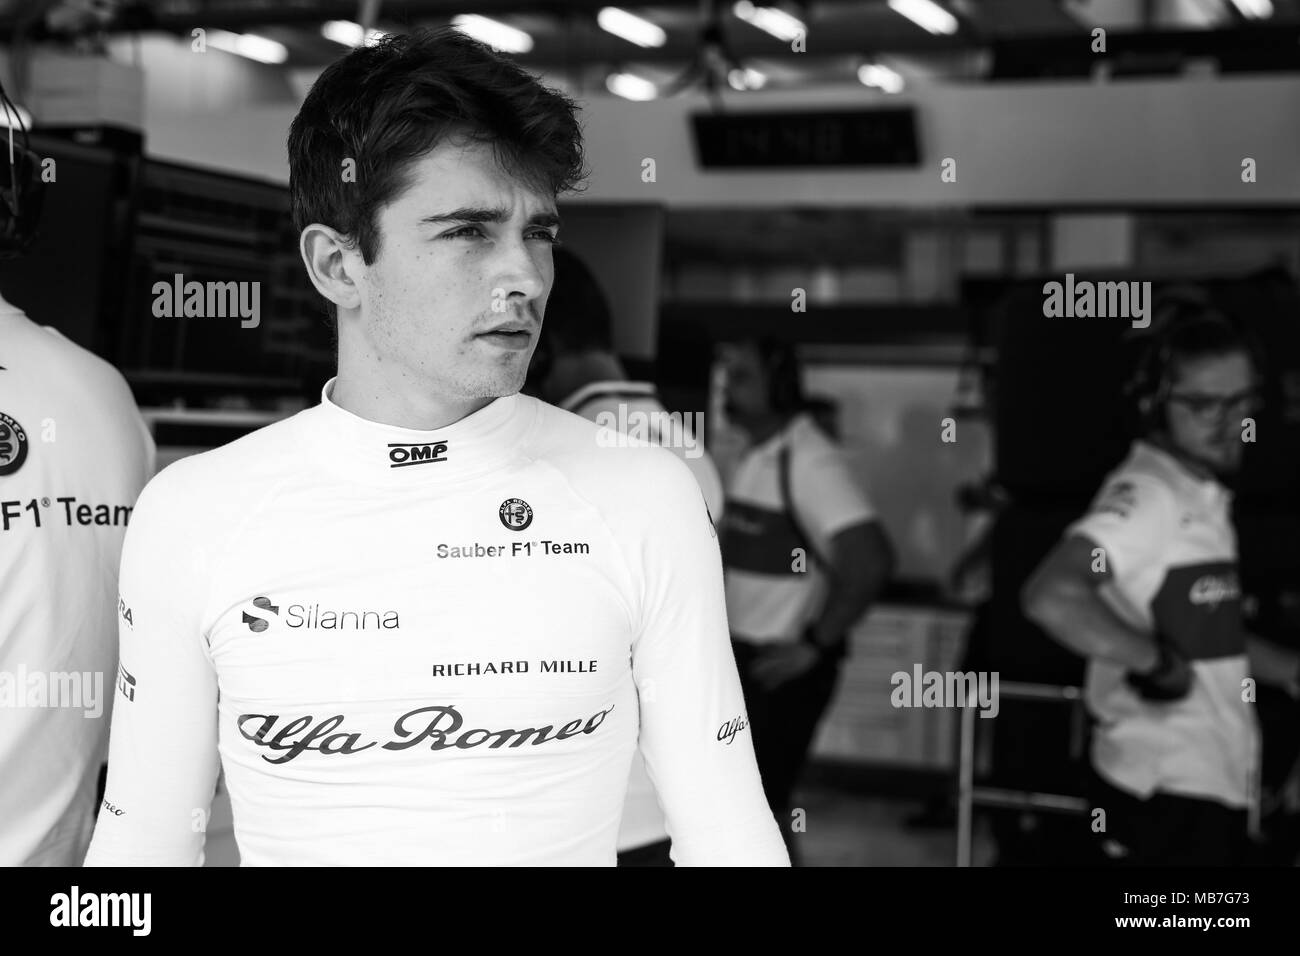 Sauber C37 Charles Leclerc Black And White Stock Photos And Images Alamy